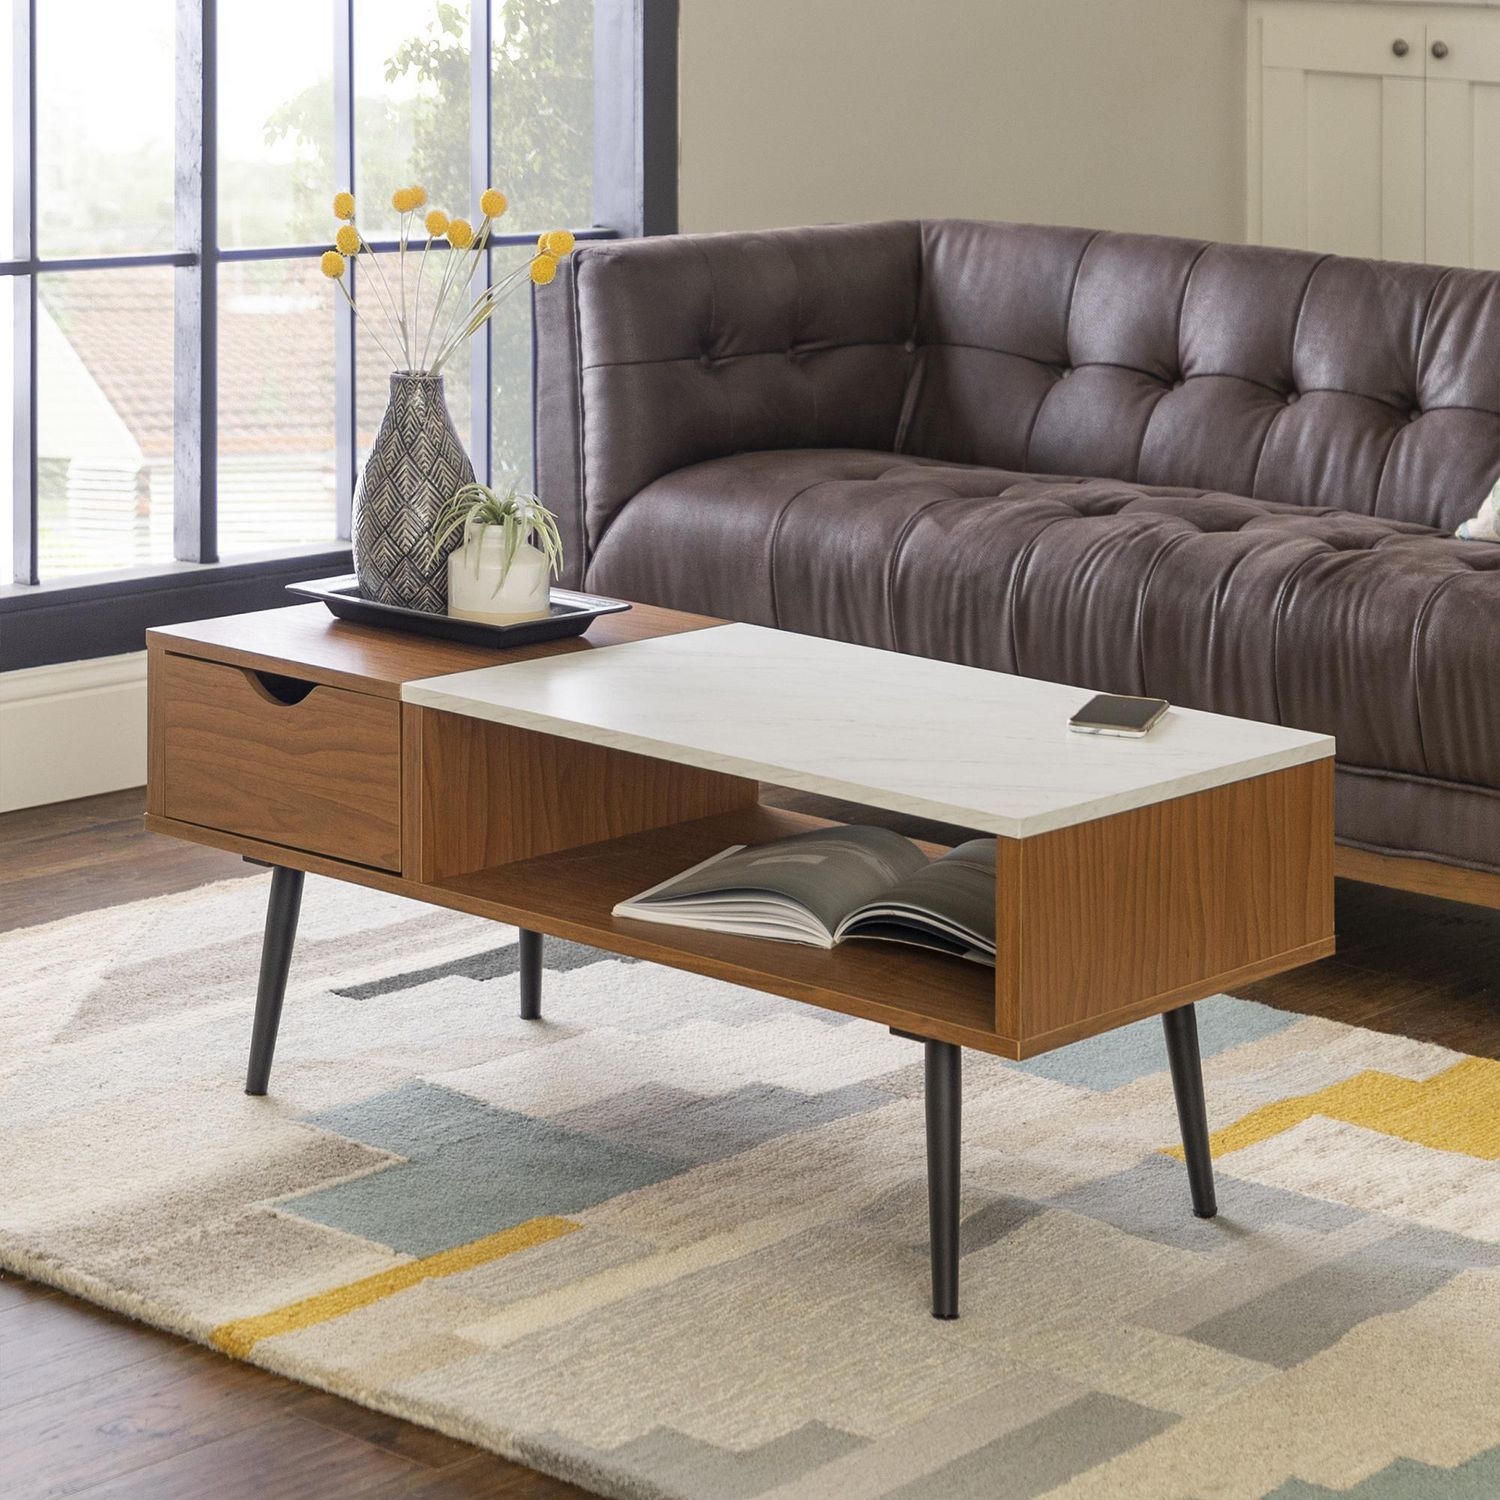 Manor Park Mid Century Modern Coffee Table With Storage – Multiple Intended For Mid Century Modern Coffee Tables (Gallery 16 of 20)